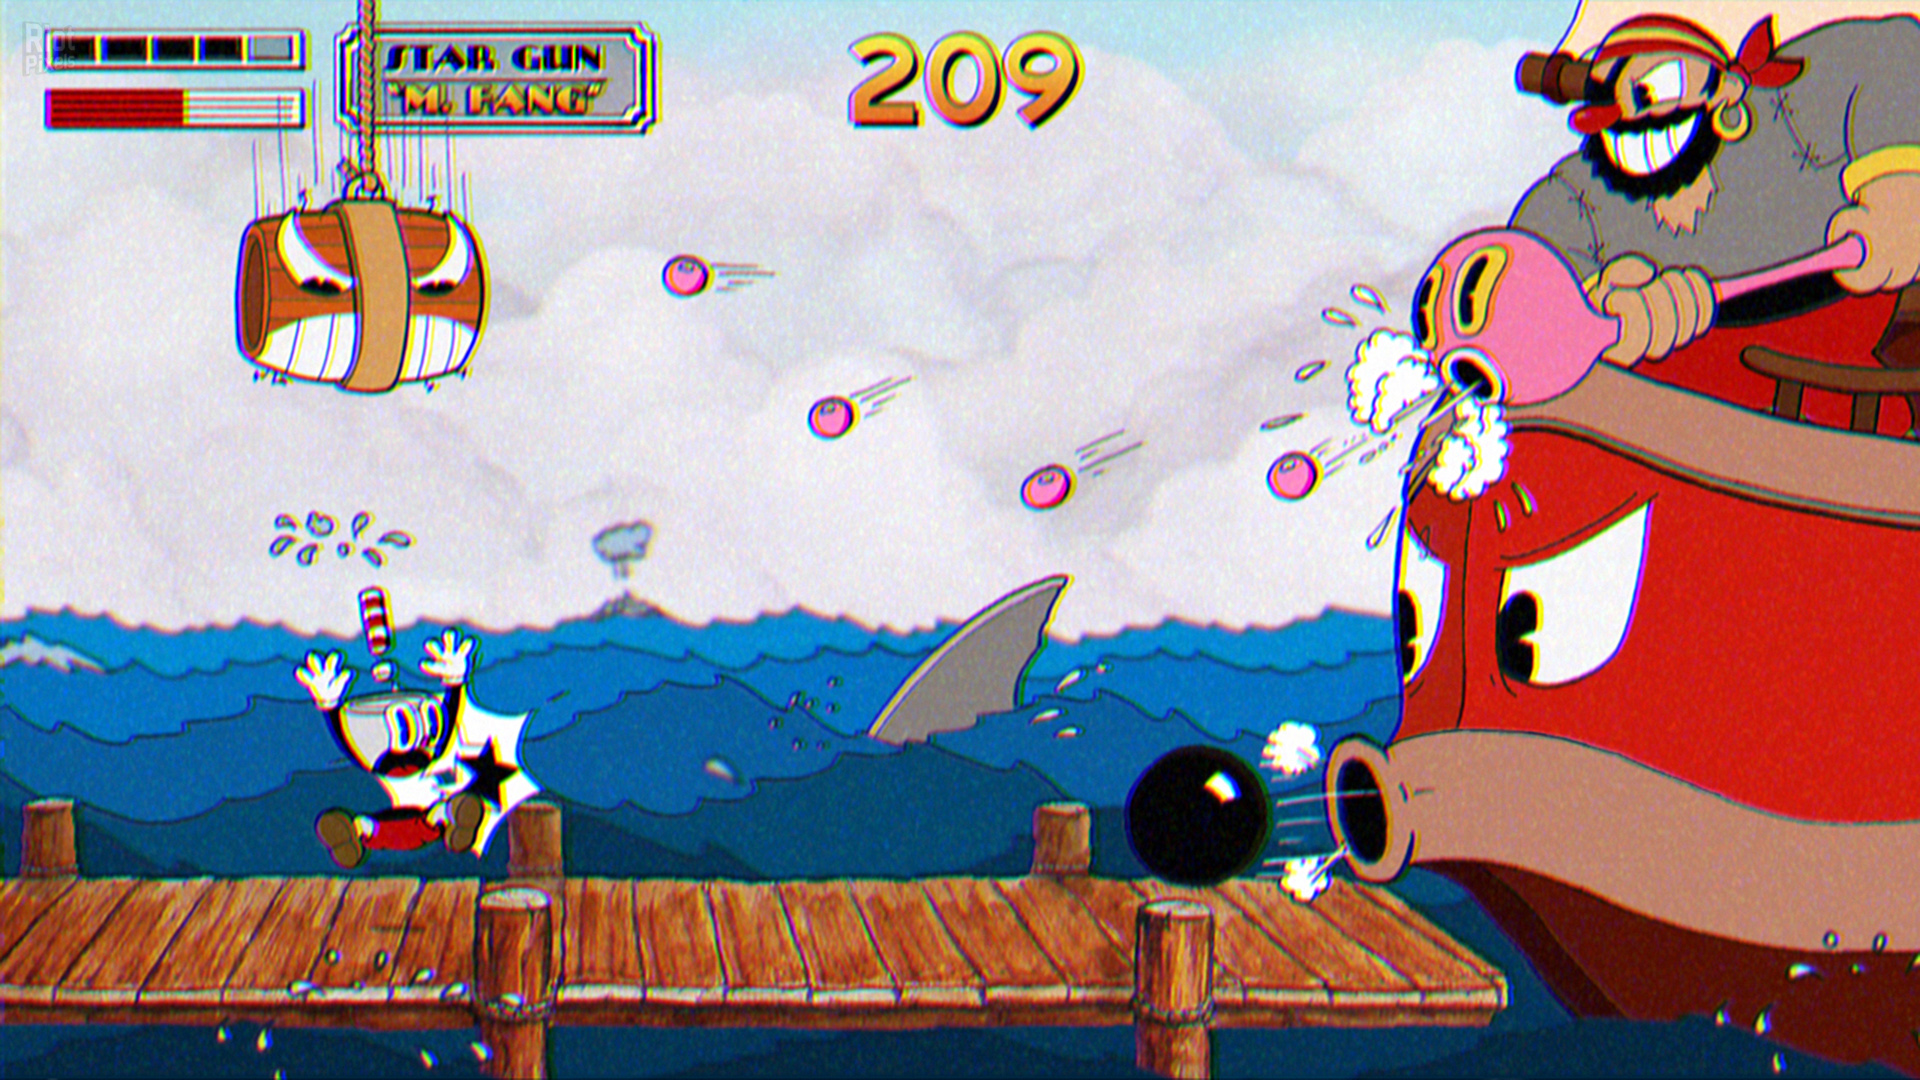 free cuphead download leacked games